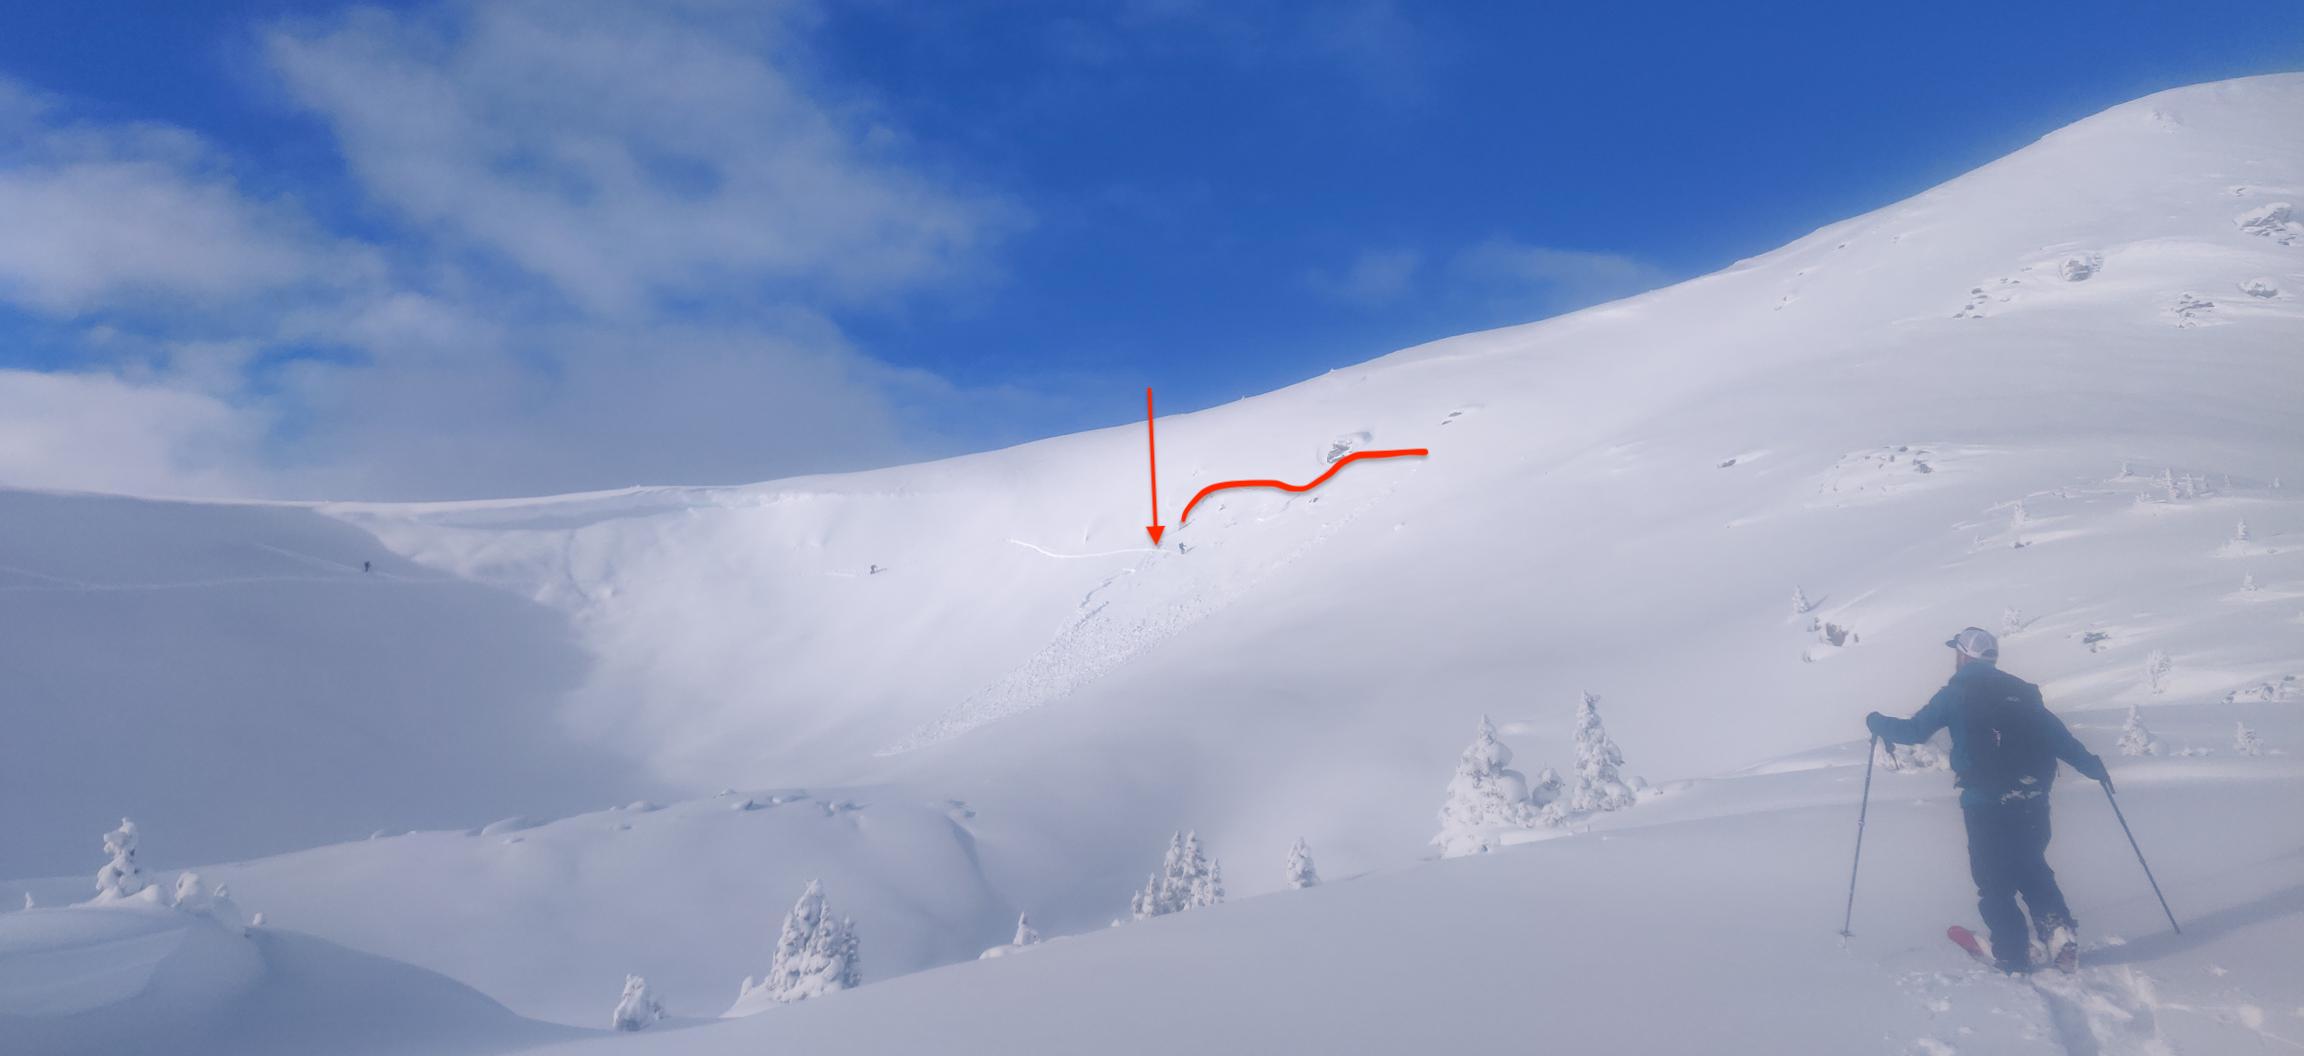 D1, R0.5. Second skier triggered slide in the paradise ridge set. Similar trigger mechanism (near rocky outcropping) to the first. Note the black dots are the three people traversing the ridge.